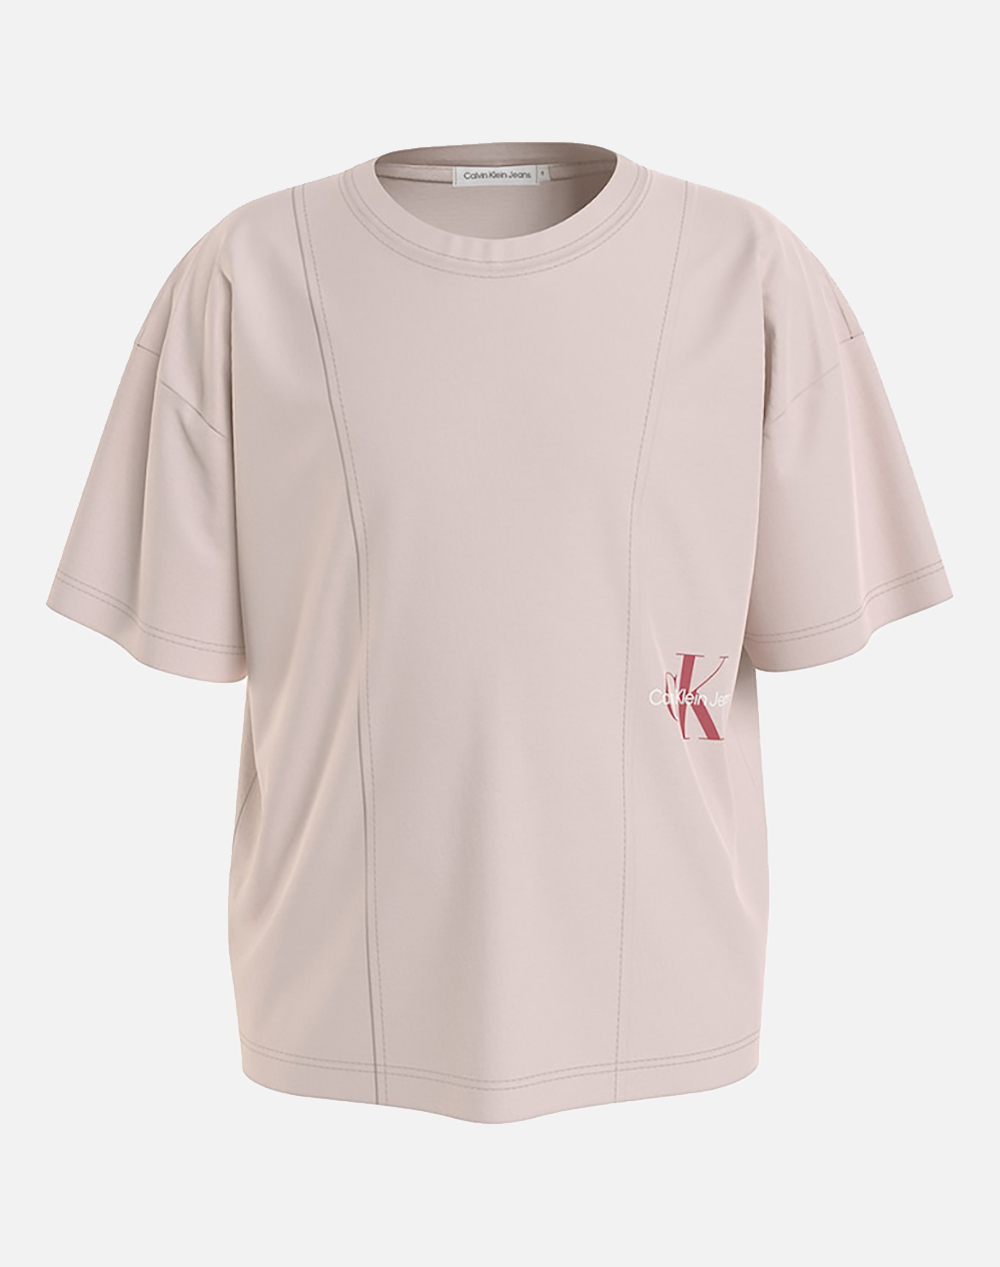 CALVIN KLEIN MONOGRAM OFF PLACED SS T-SHIRT IG0IG02430-4-6-TF6 Nude 3830ACALV3400015_XR27989